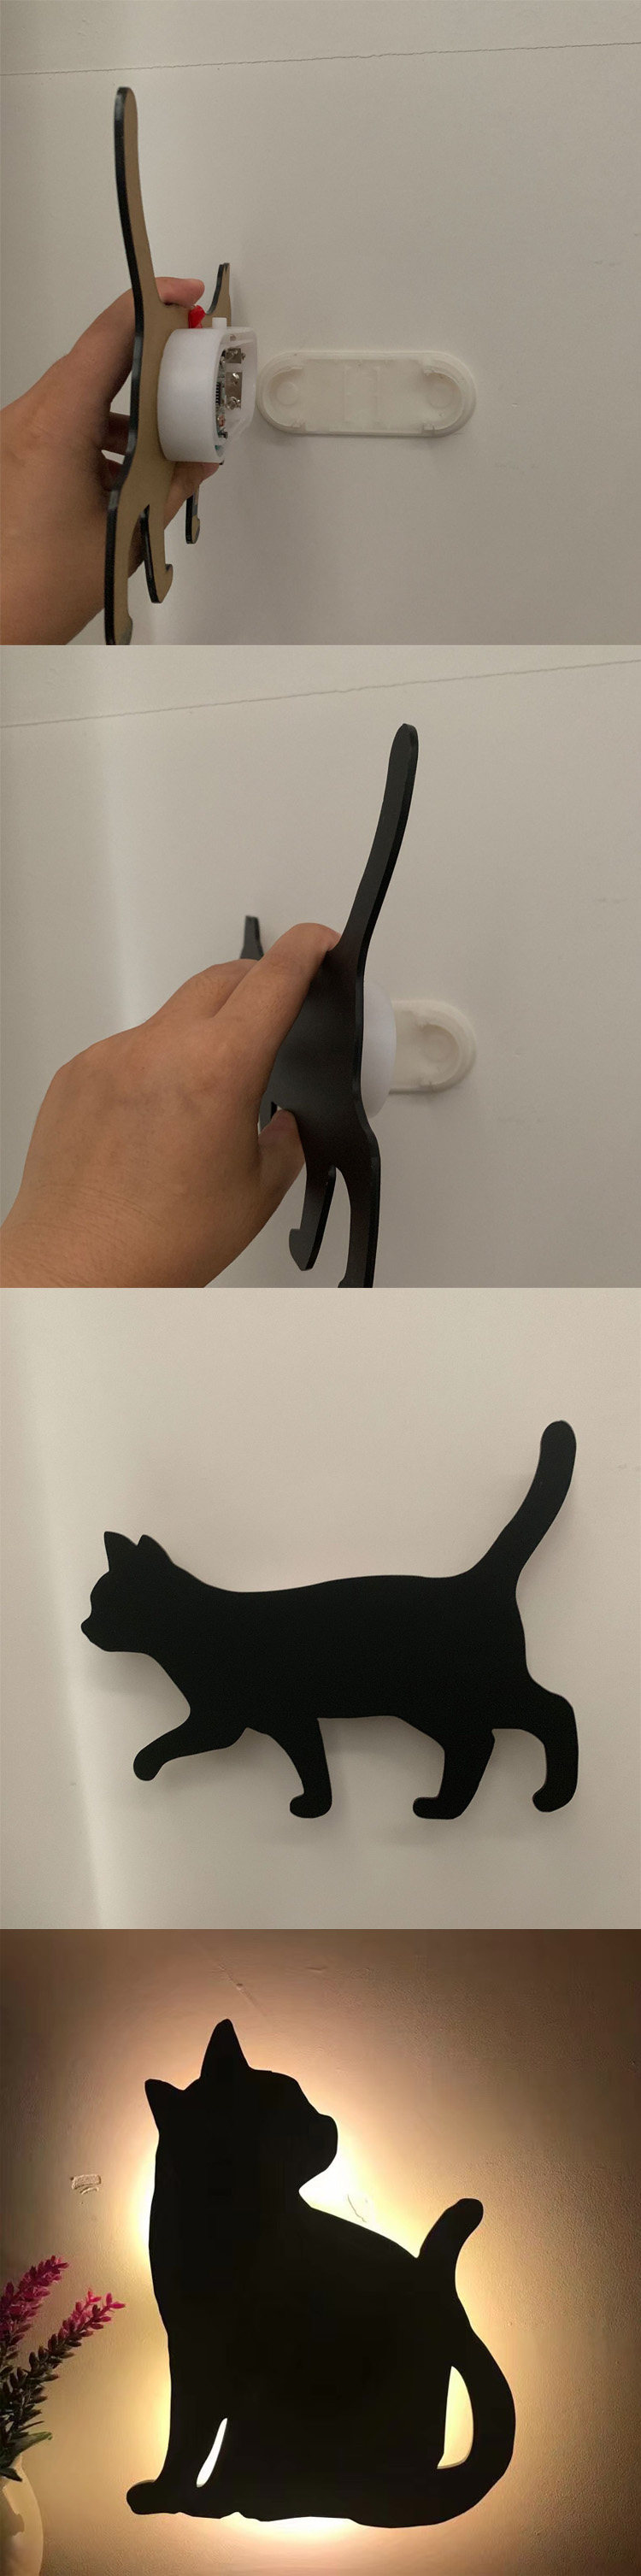 Cat Night Light Voice Activated Black Cat Silhouette Lamp Wall Decor for Home Living Room Hallway Bedroom Animal Warm Li